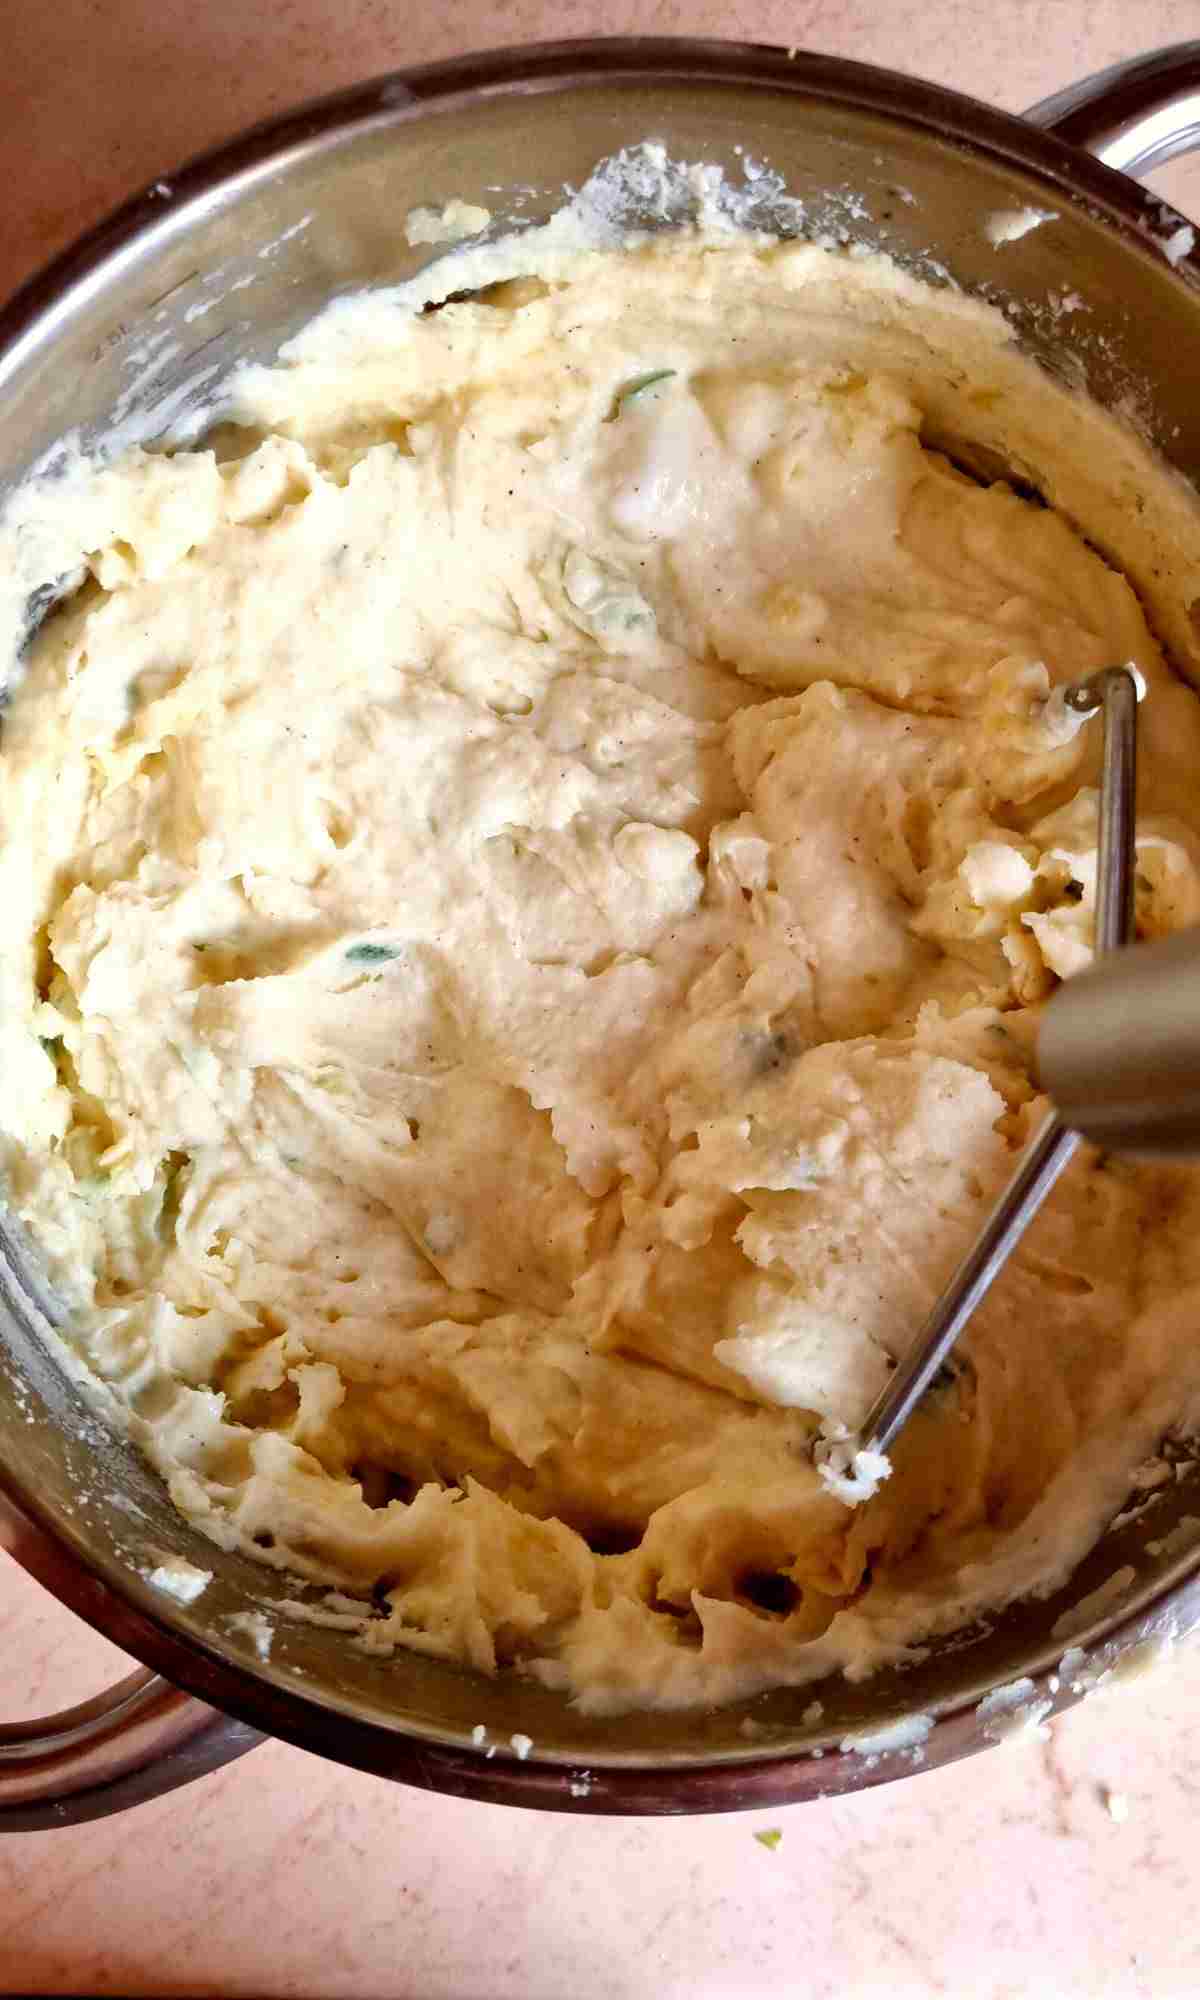 Mixing the mashed potatoes with sour cream.